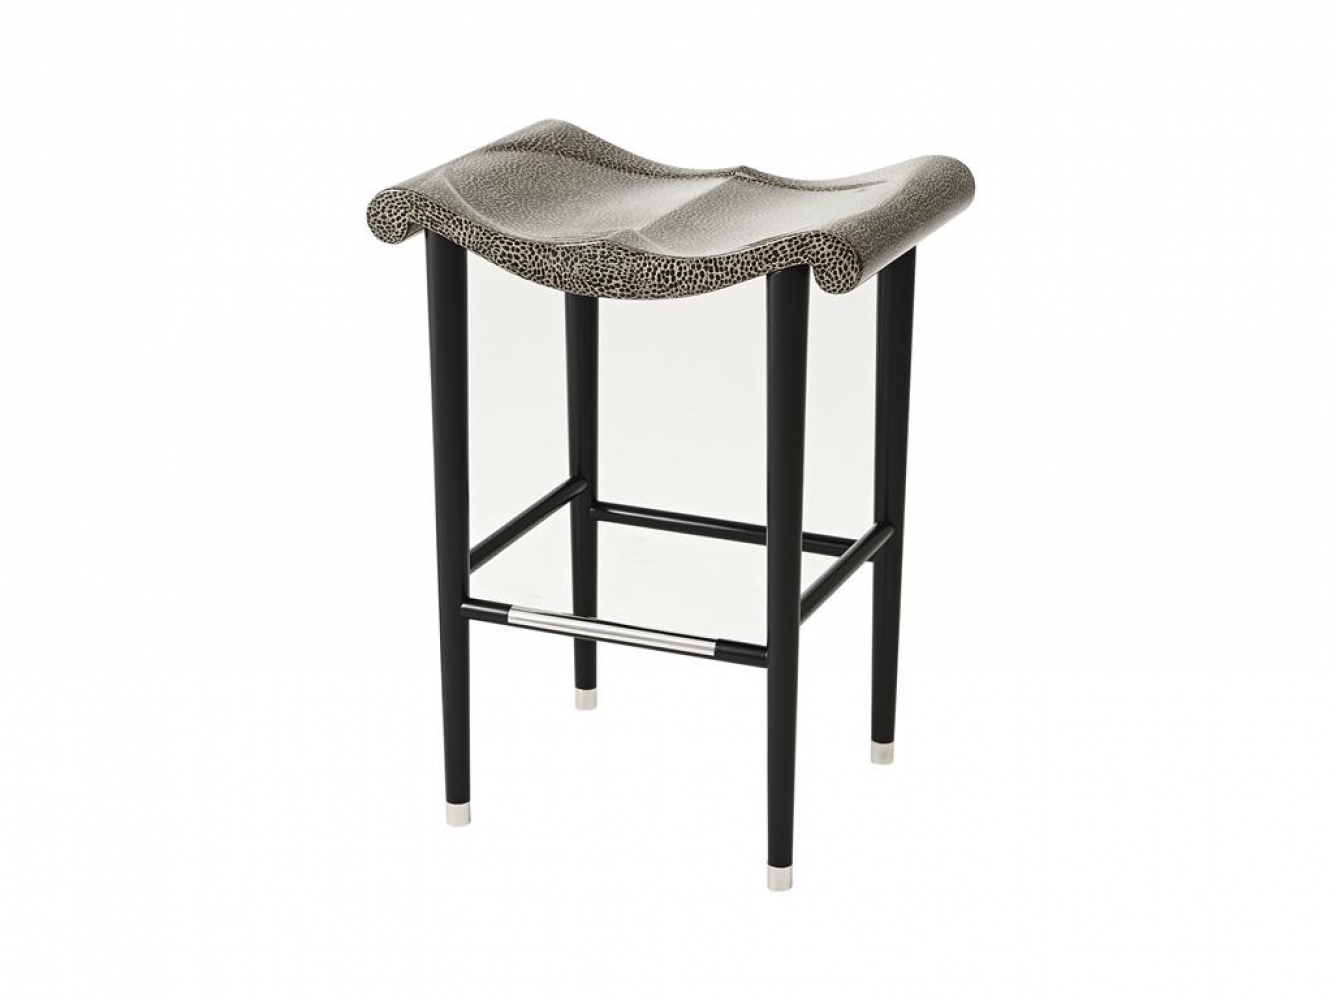 Palmer House Counter Stool